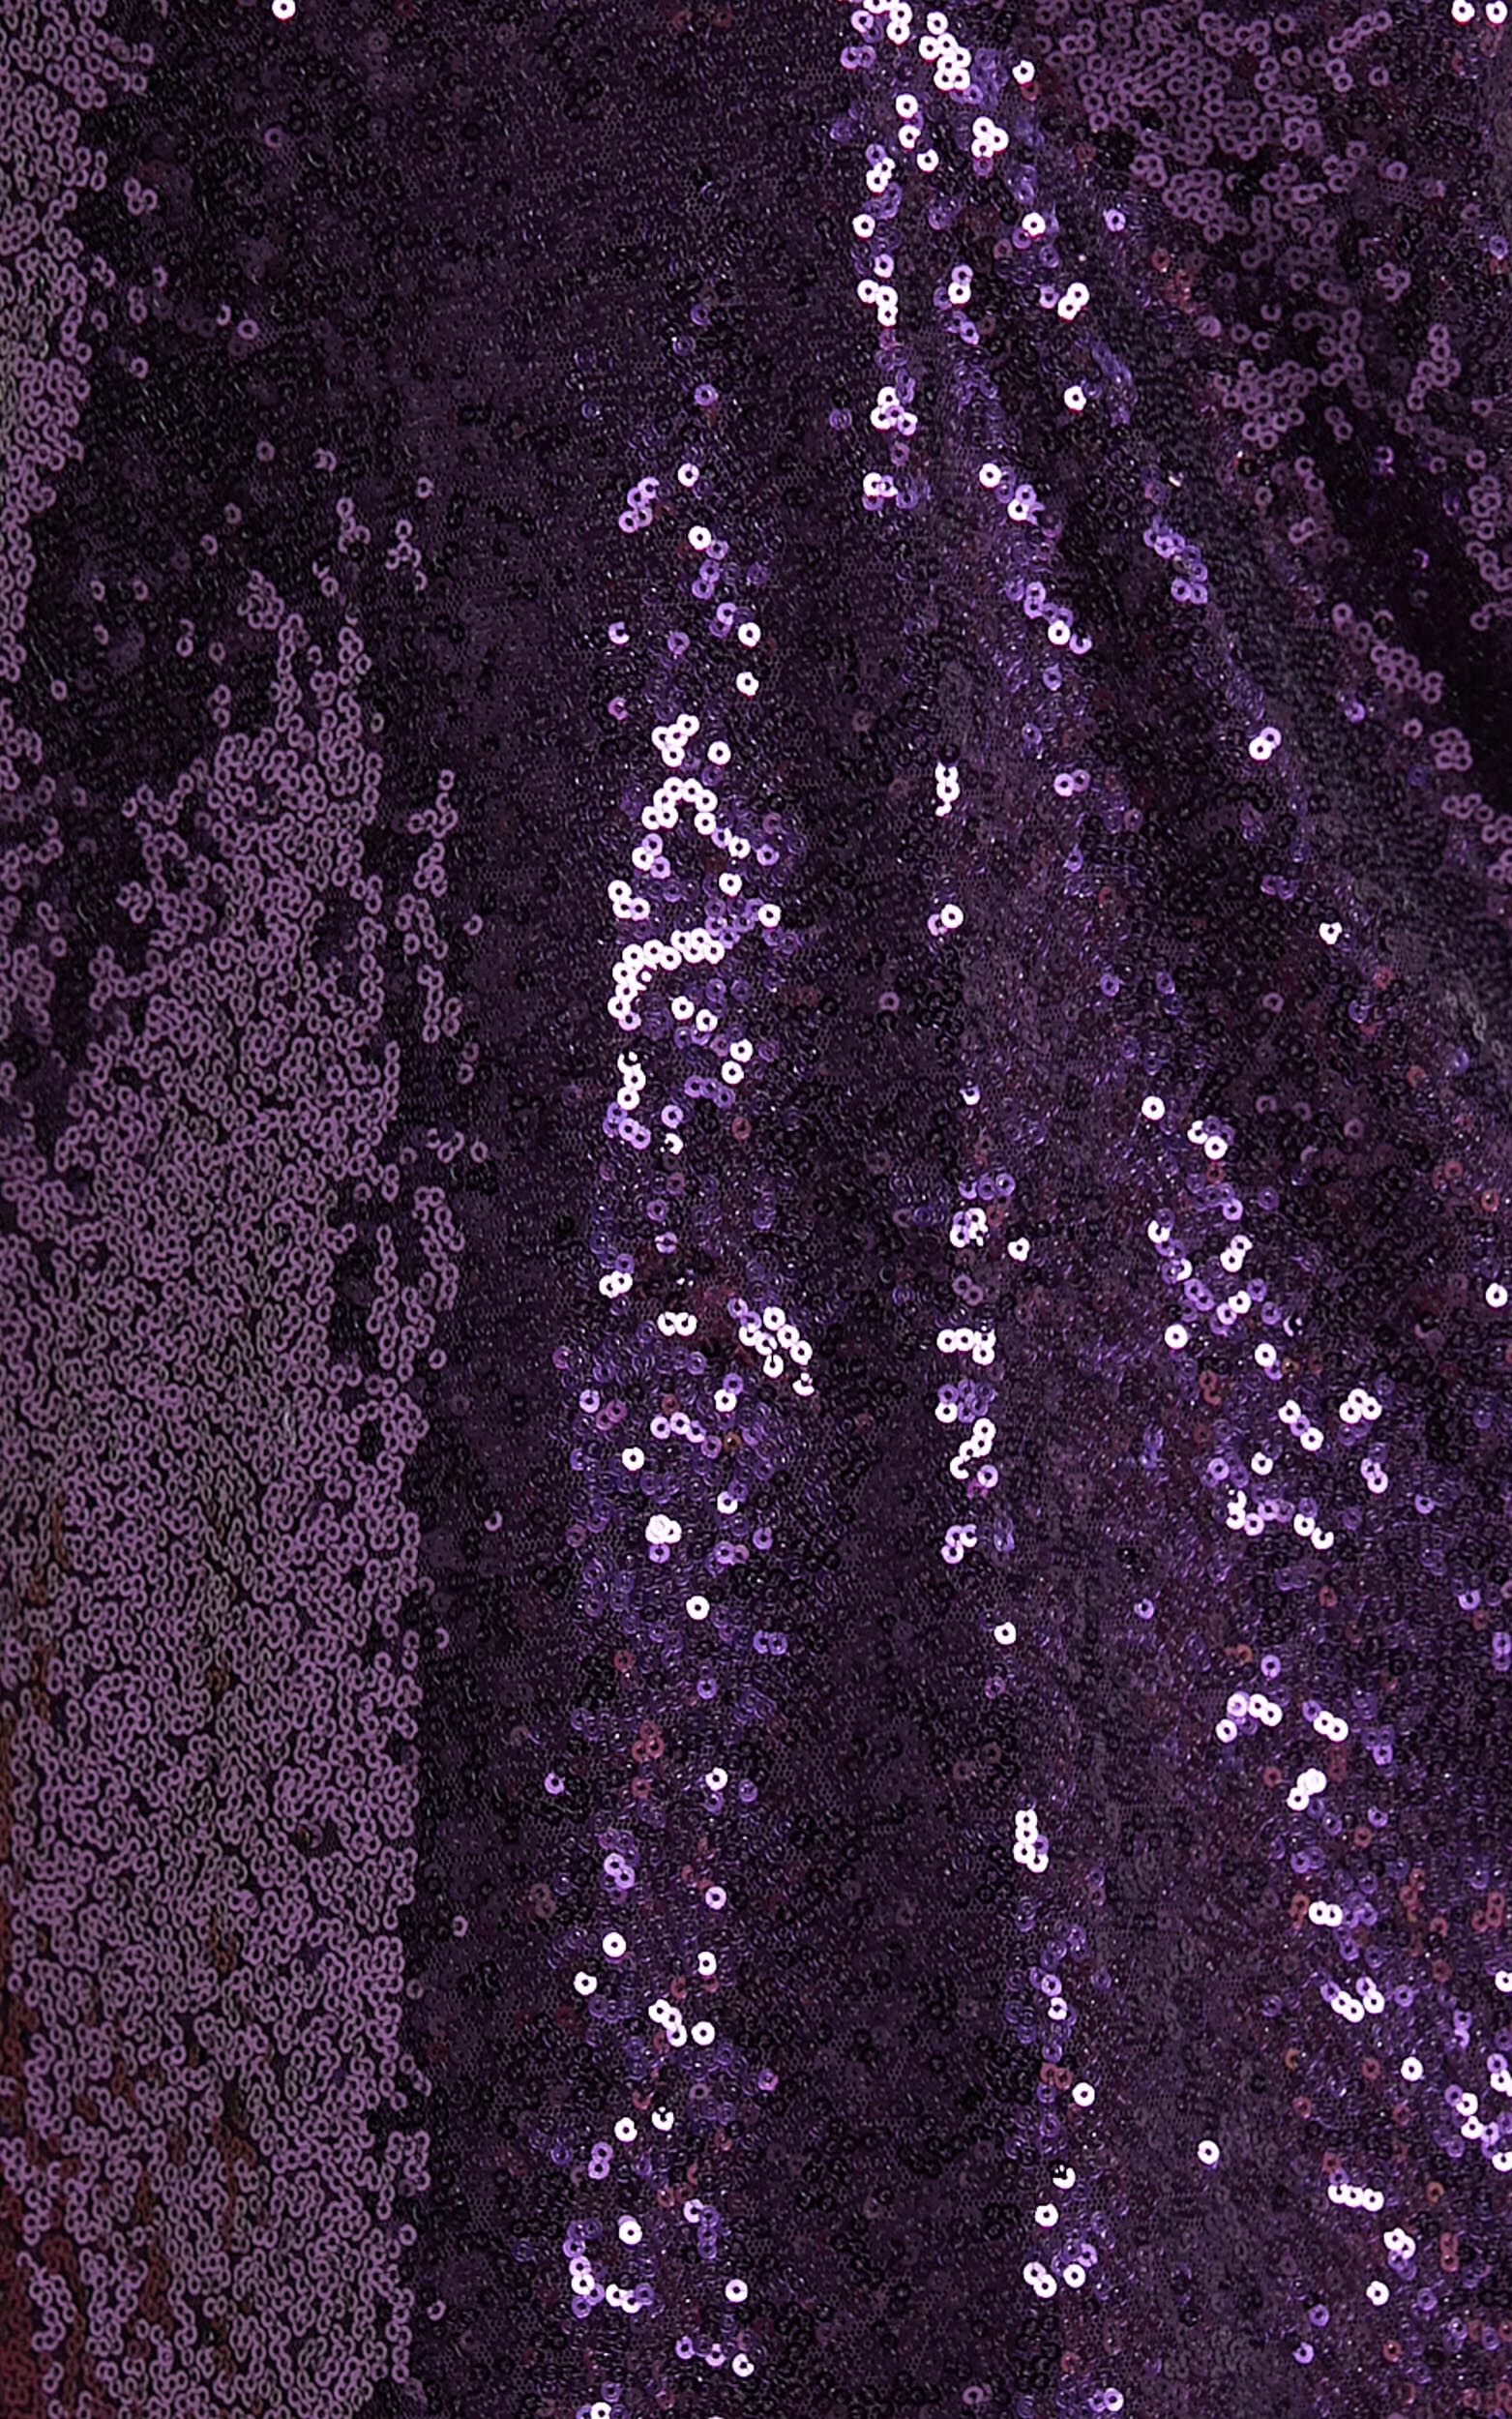 Purple Full Sequin Fabric for Dress, Purple Sequins on Mesh Fabric by the  Yard